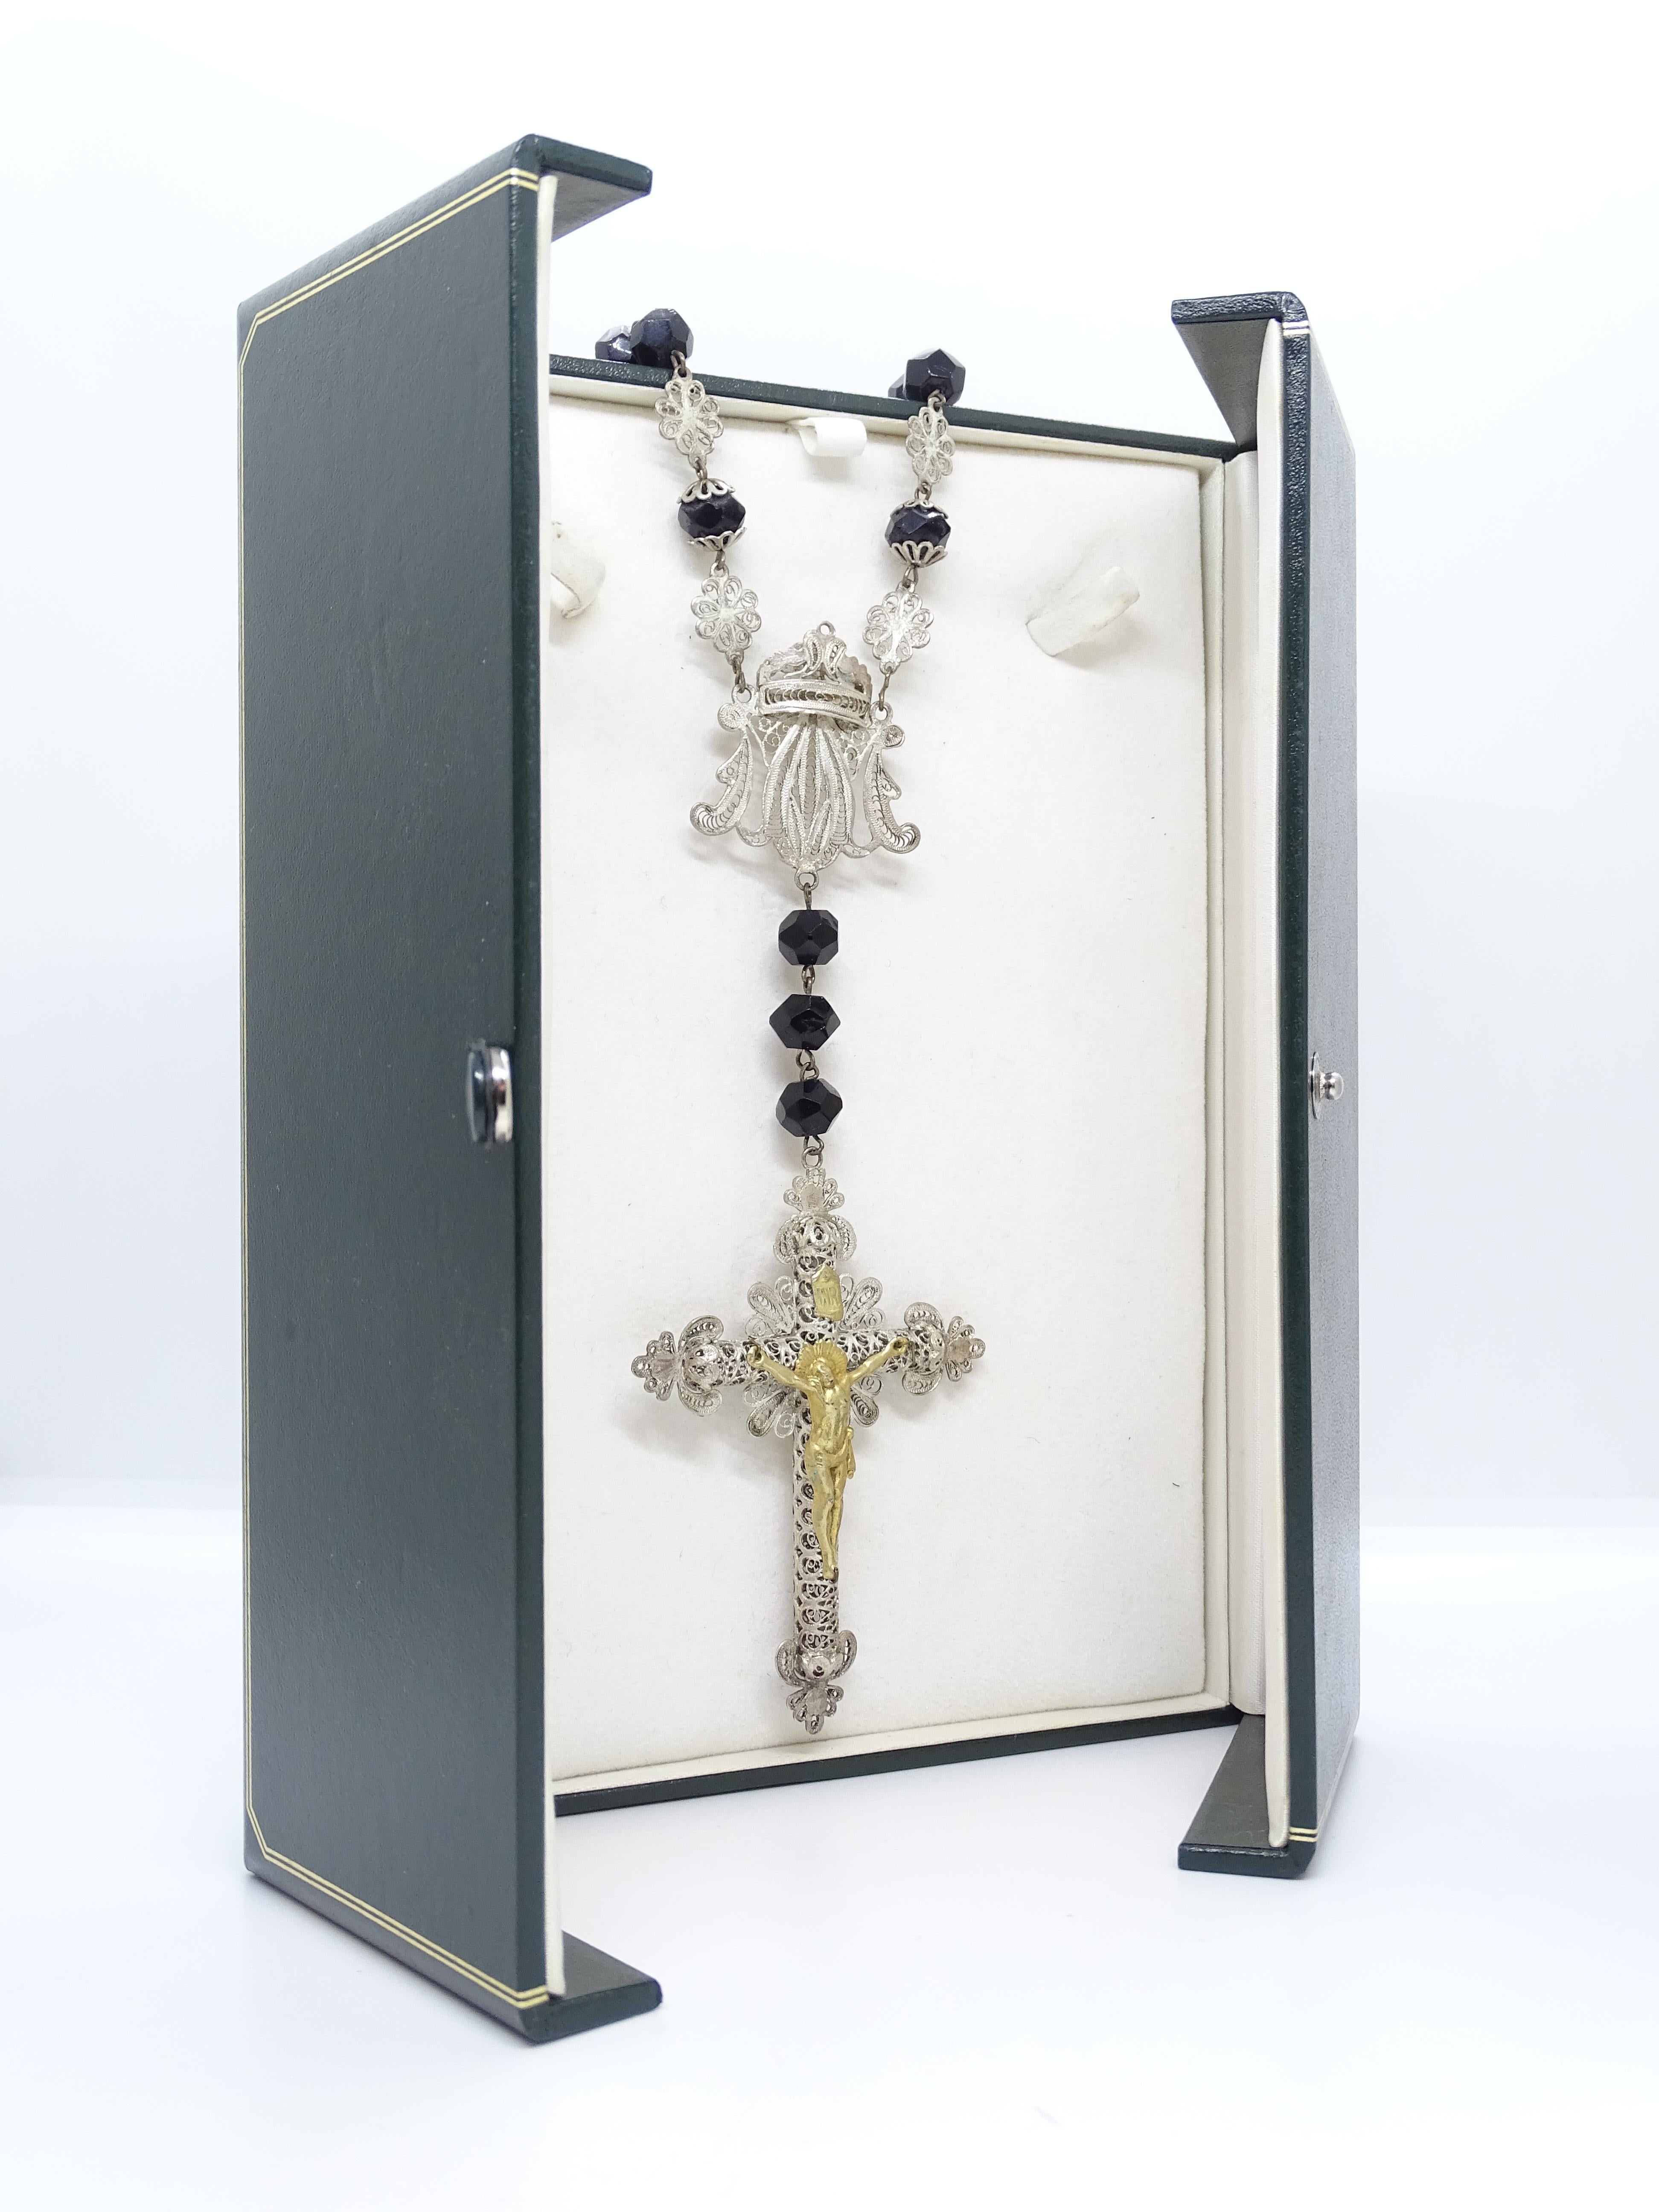 Silver and Gold Filigree Rosary, Onyx Beads, 19th century
Precious and delicate 19th century rosary made in delicate silver filigree. Onyx beads and filigree openwork cross, which presents a silver-gilt Christ.
A rosary is an object made up of a